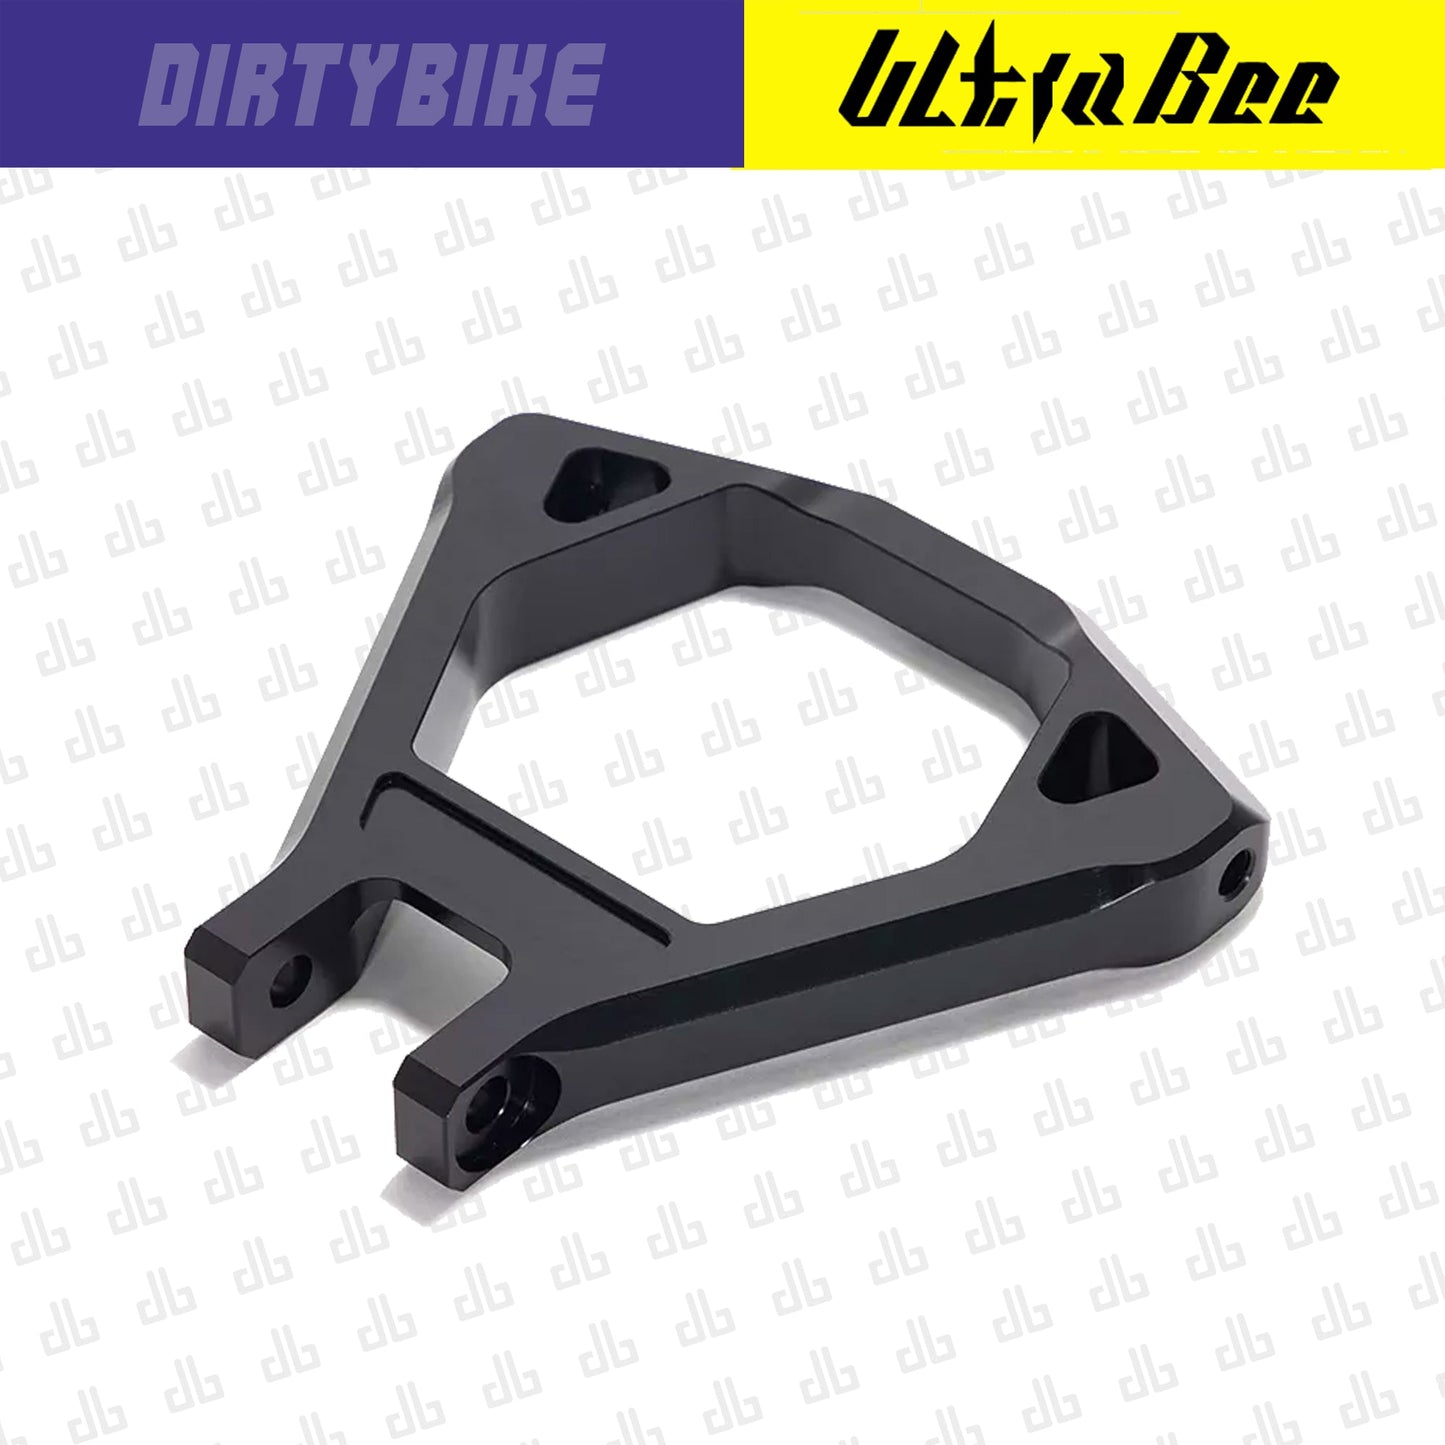 DirtyBike Aluminum Suspension Triangle for Surron Ultra Bee - REVRides